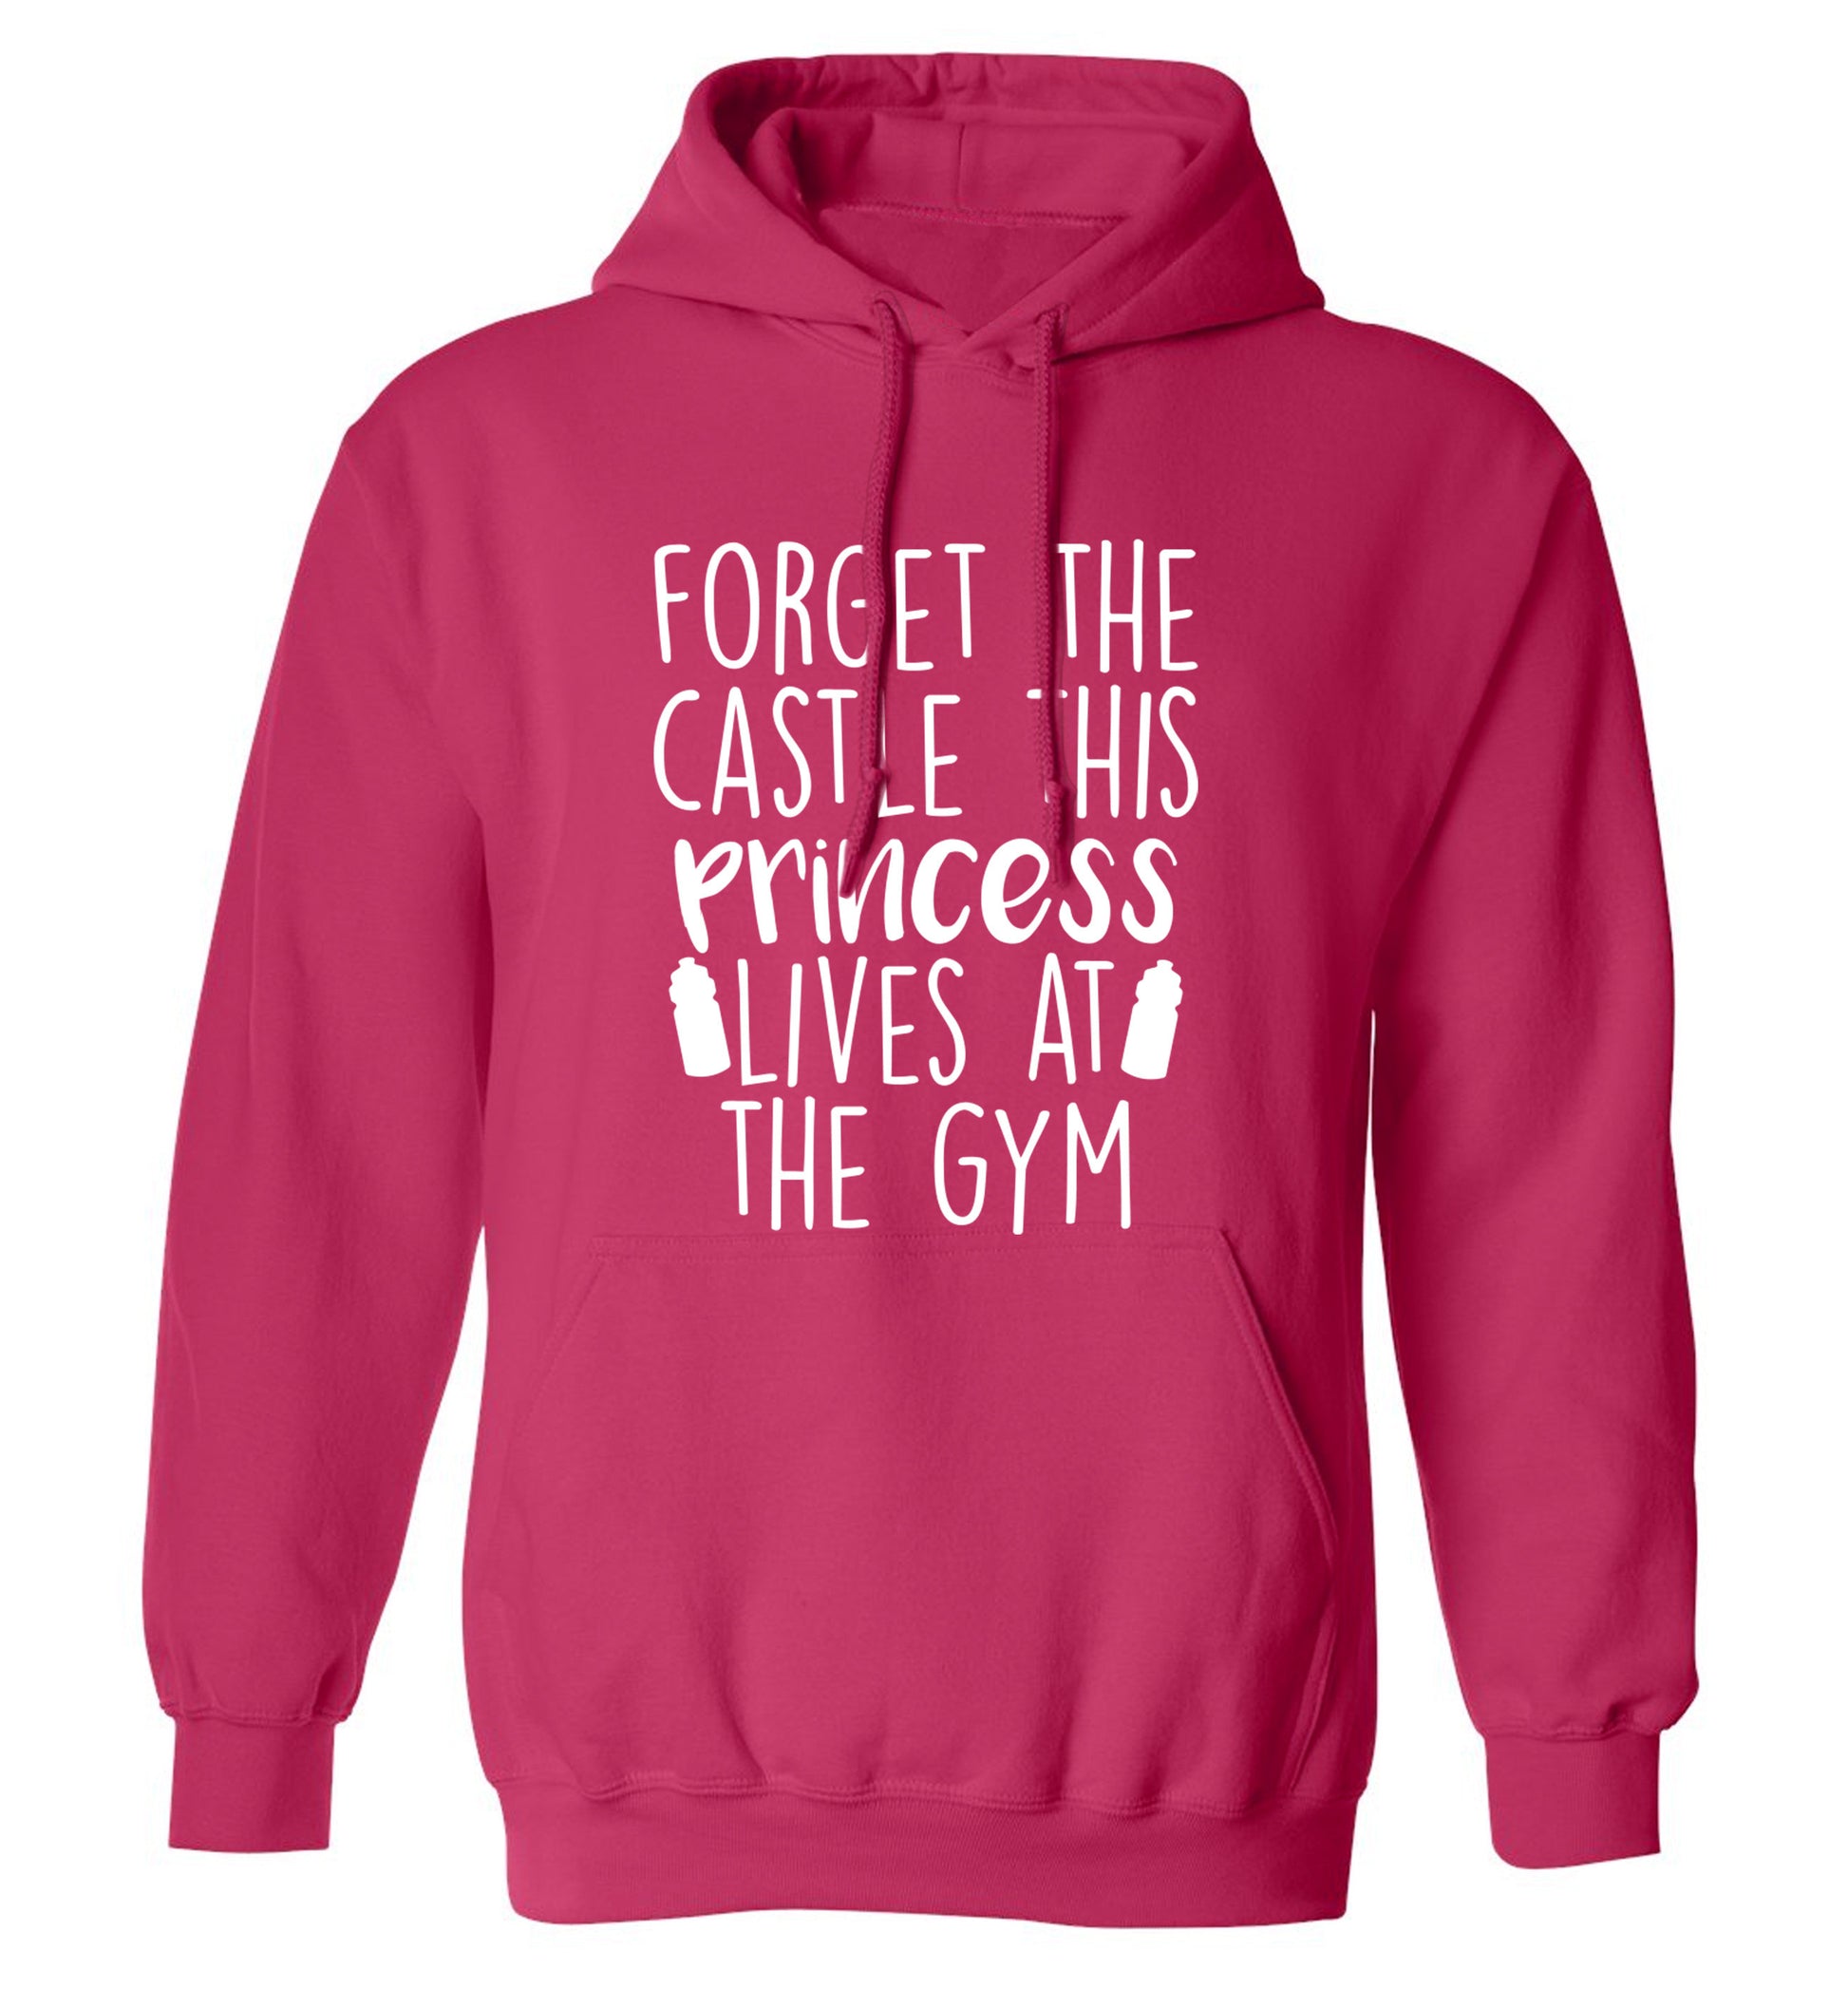 Forget the castle this princess lives at the gym adults unisex pink hoodie 2XL